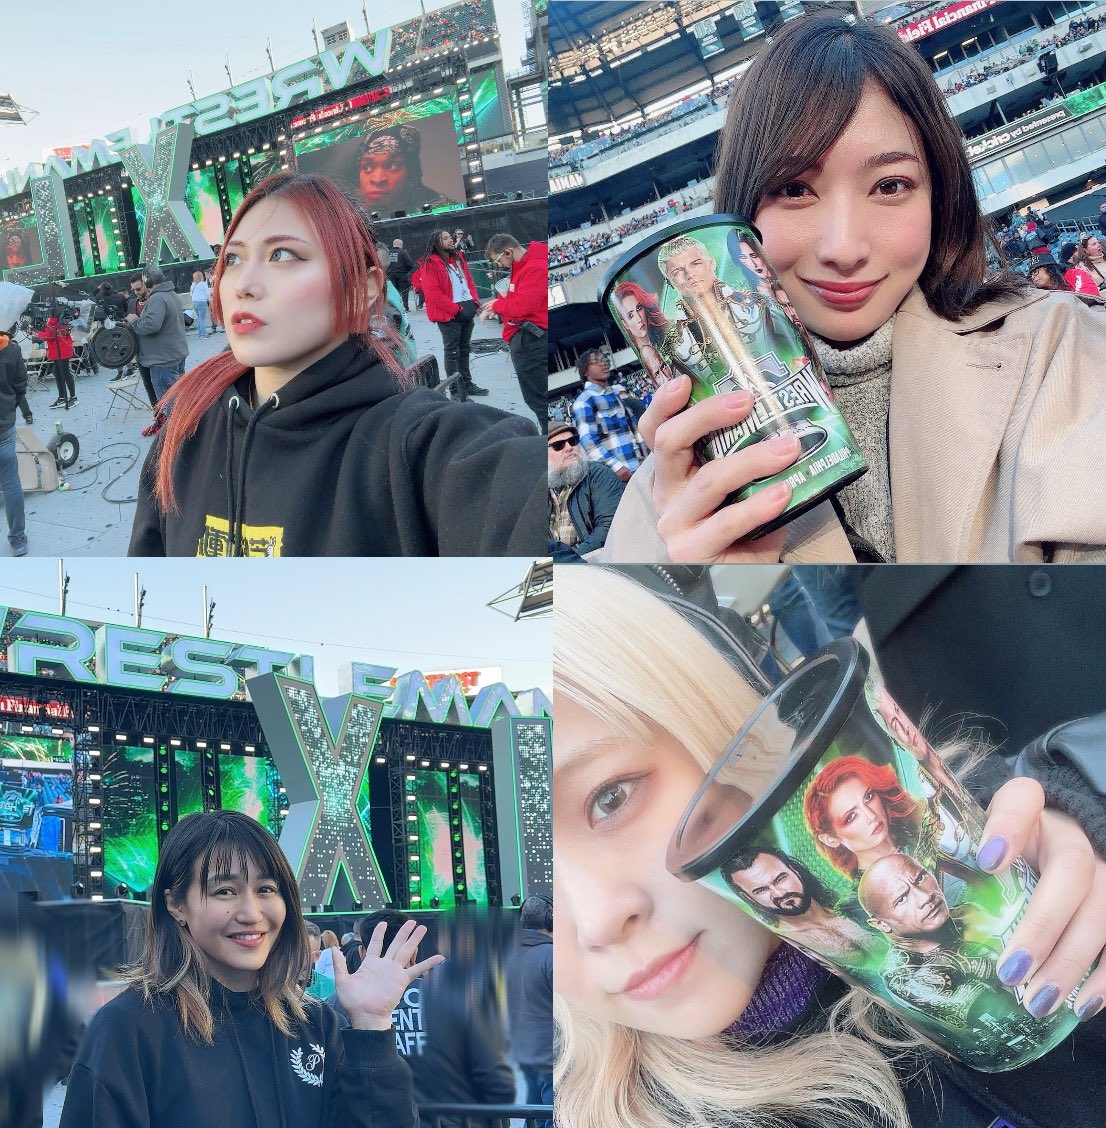 shoutout the stardom girlies at mania i hope they all had a fun time ❤️